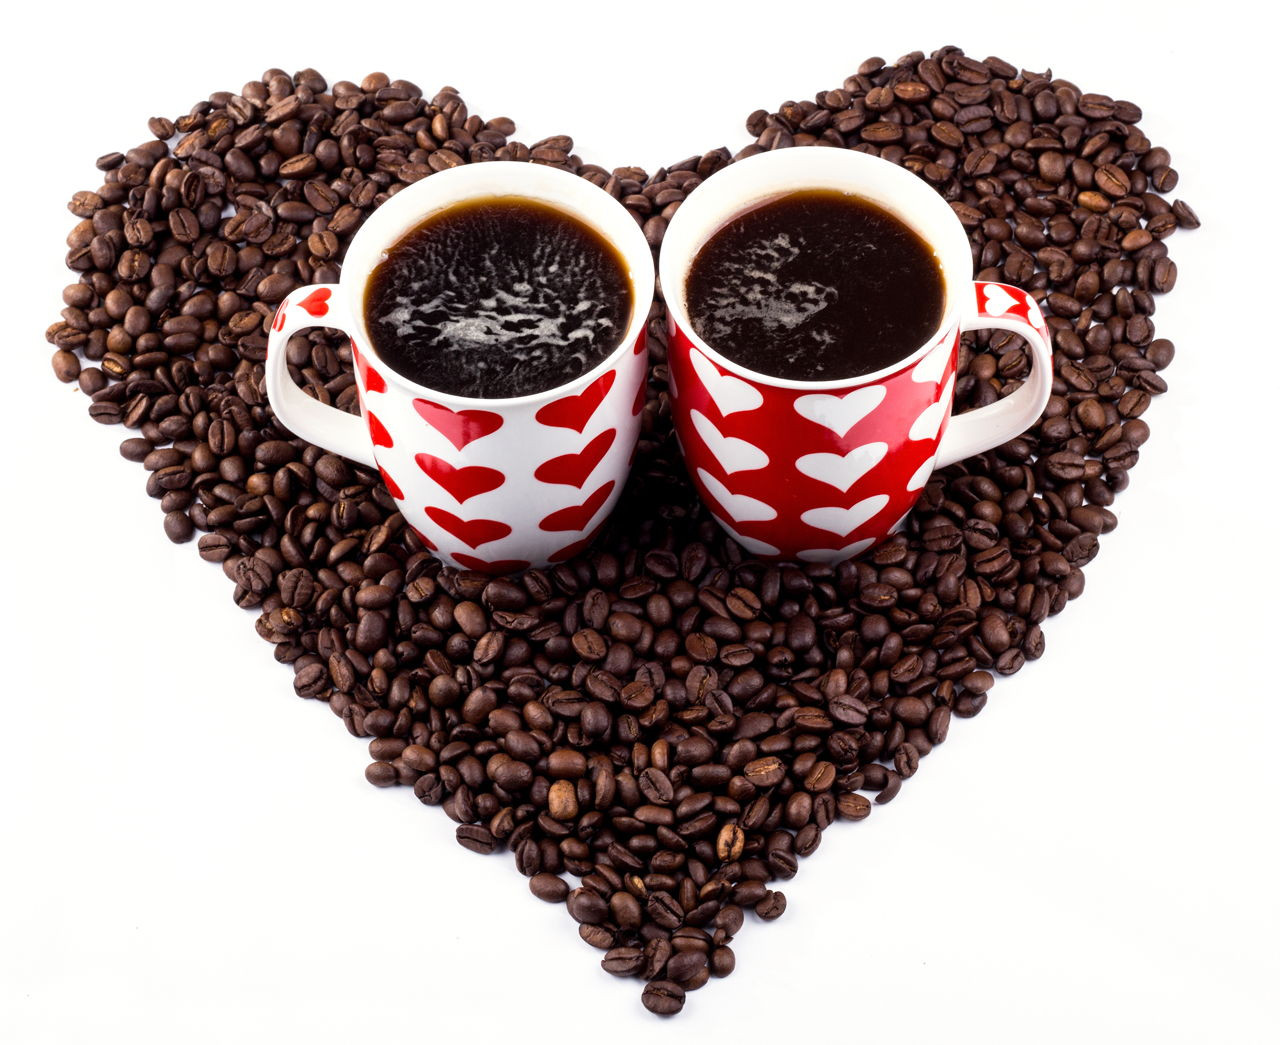 Valentines Day Coffee Drinks
 Know the Side Effects of Decaf Coffee Before You Drink it